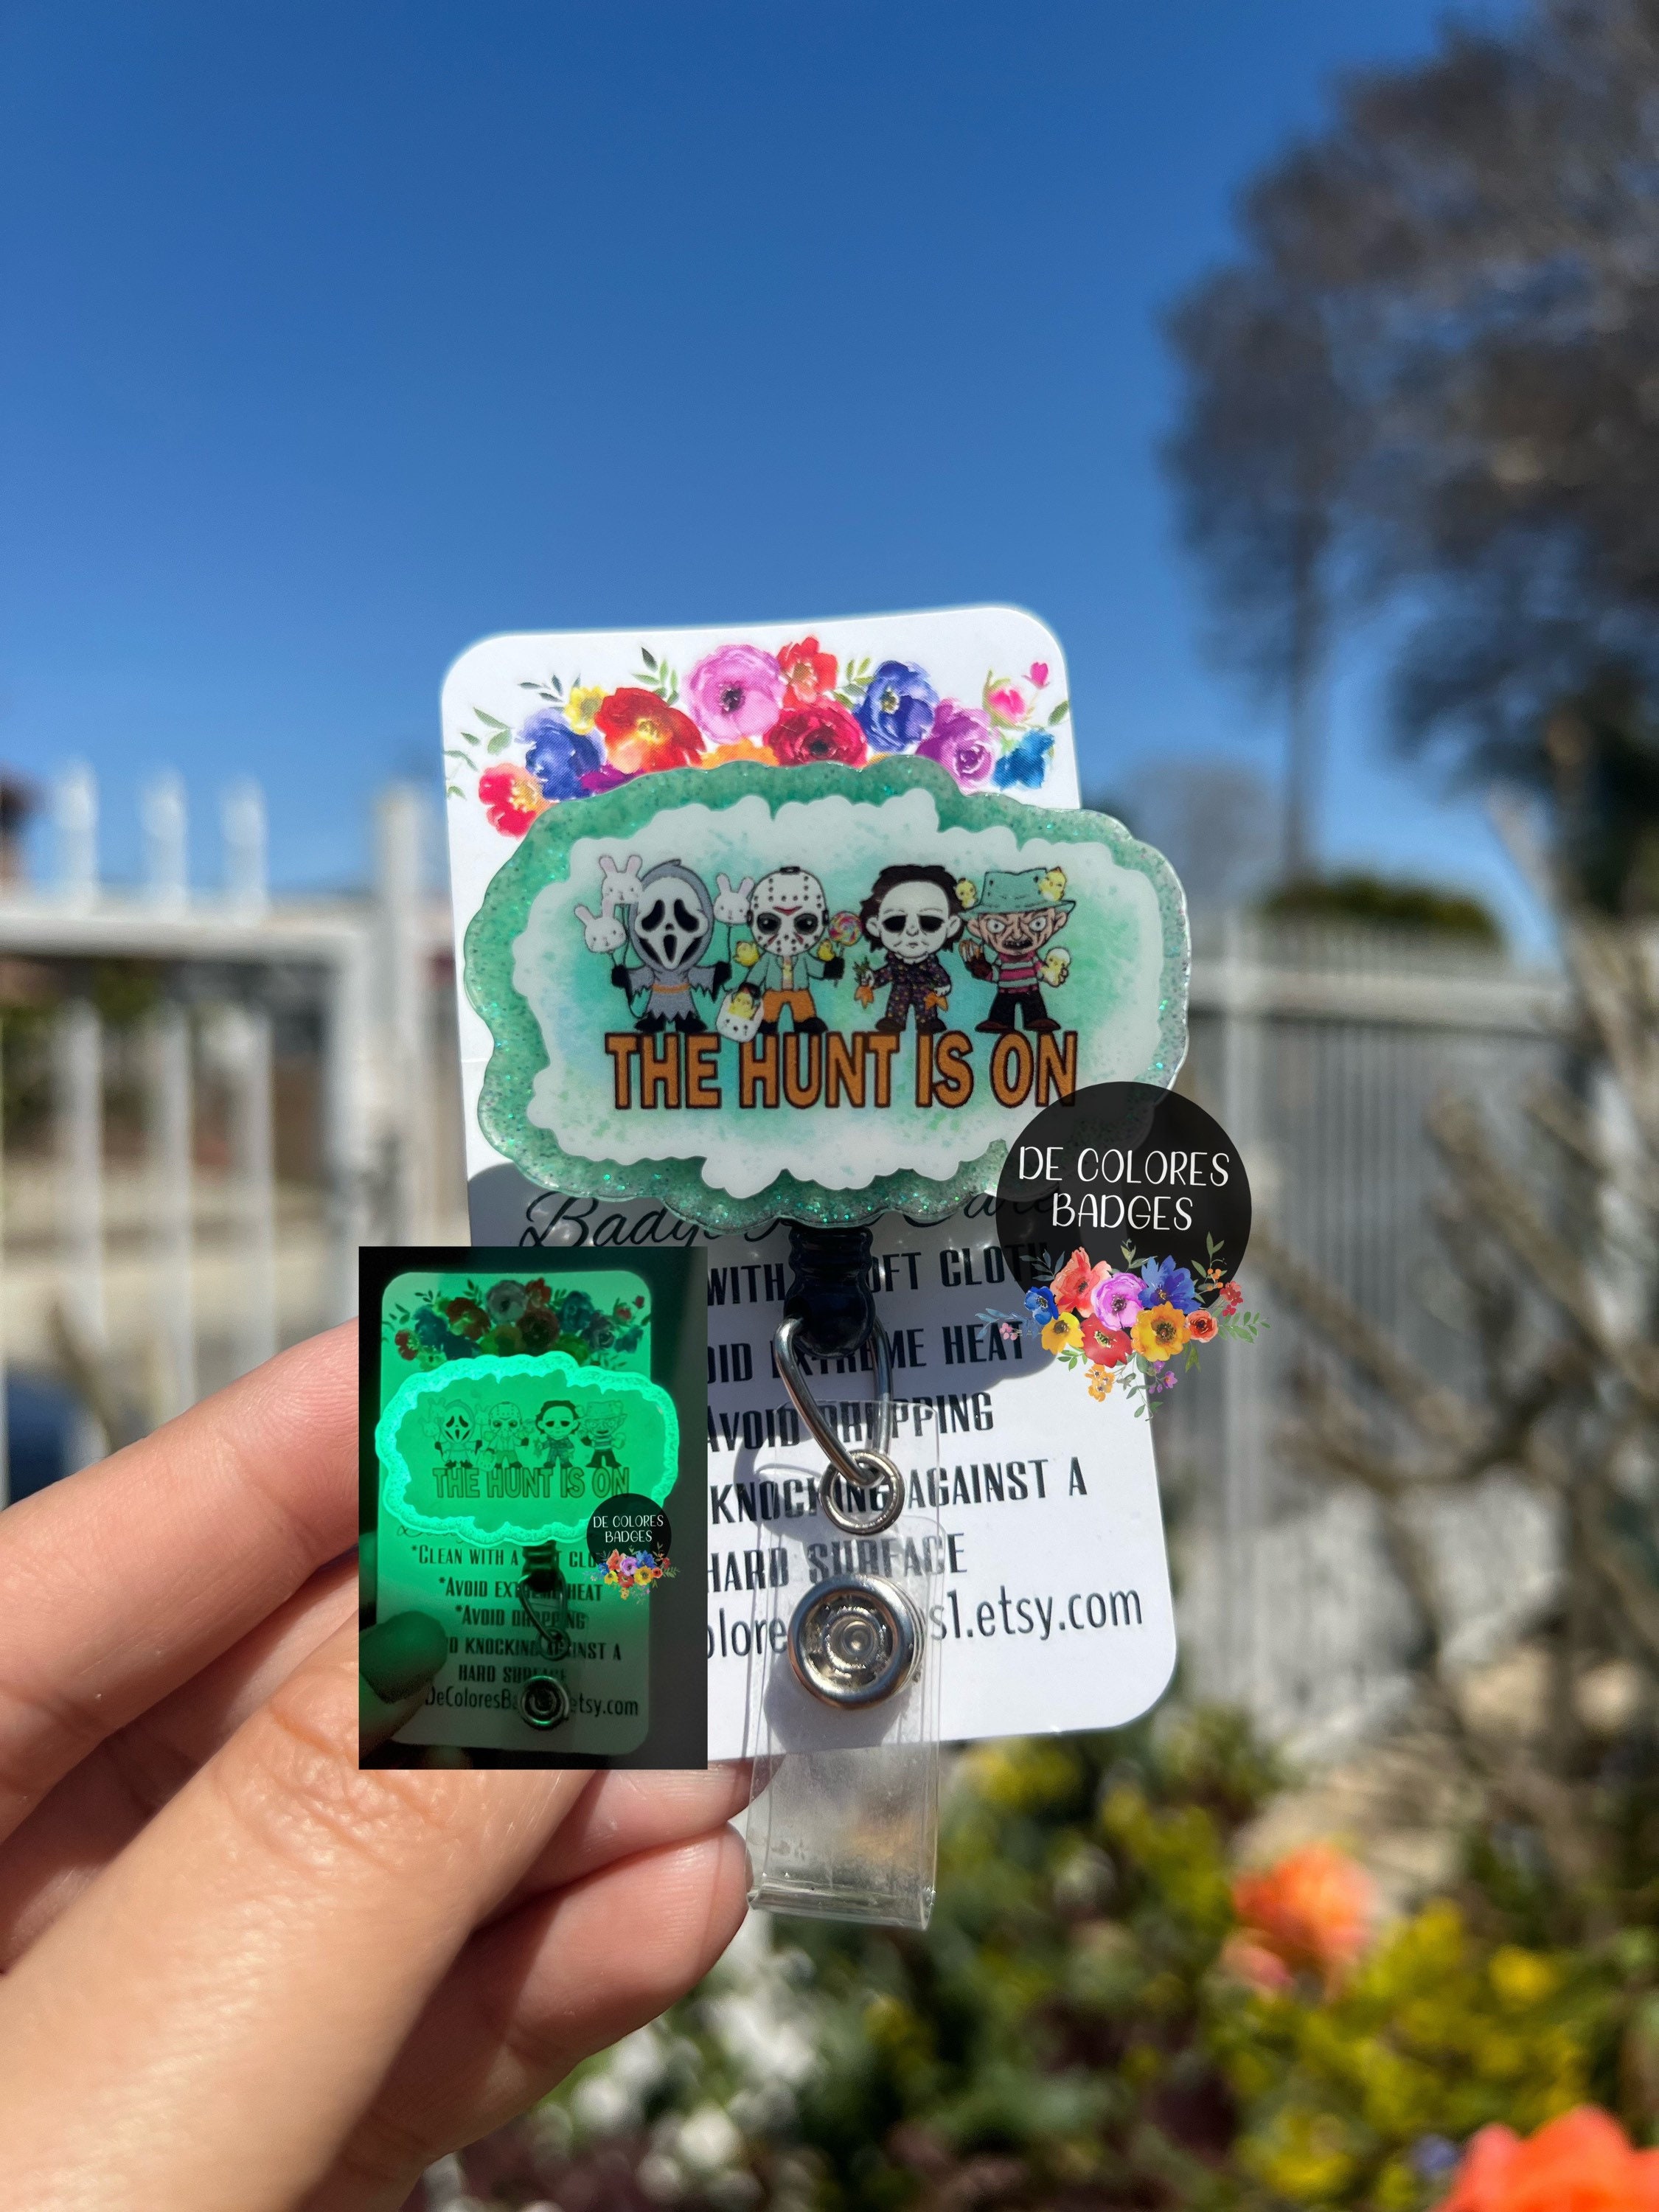 Easter Horror Badge, Retro Easter Badge, Hanging With My Peeps Badge,  Chillin With My Badge, Easter Badge, Horror Badge Reel, Ghost Face 